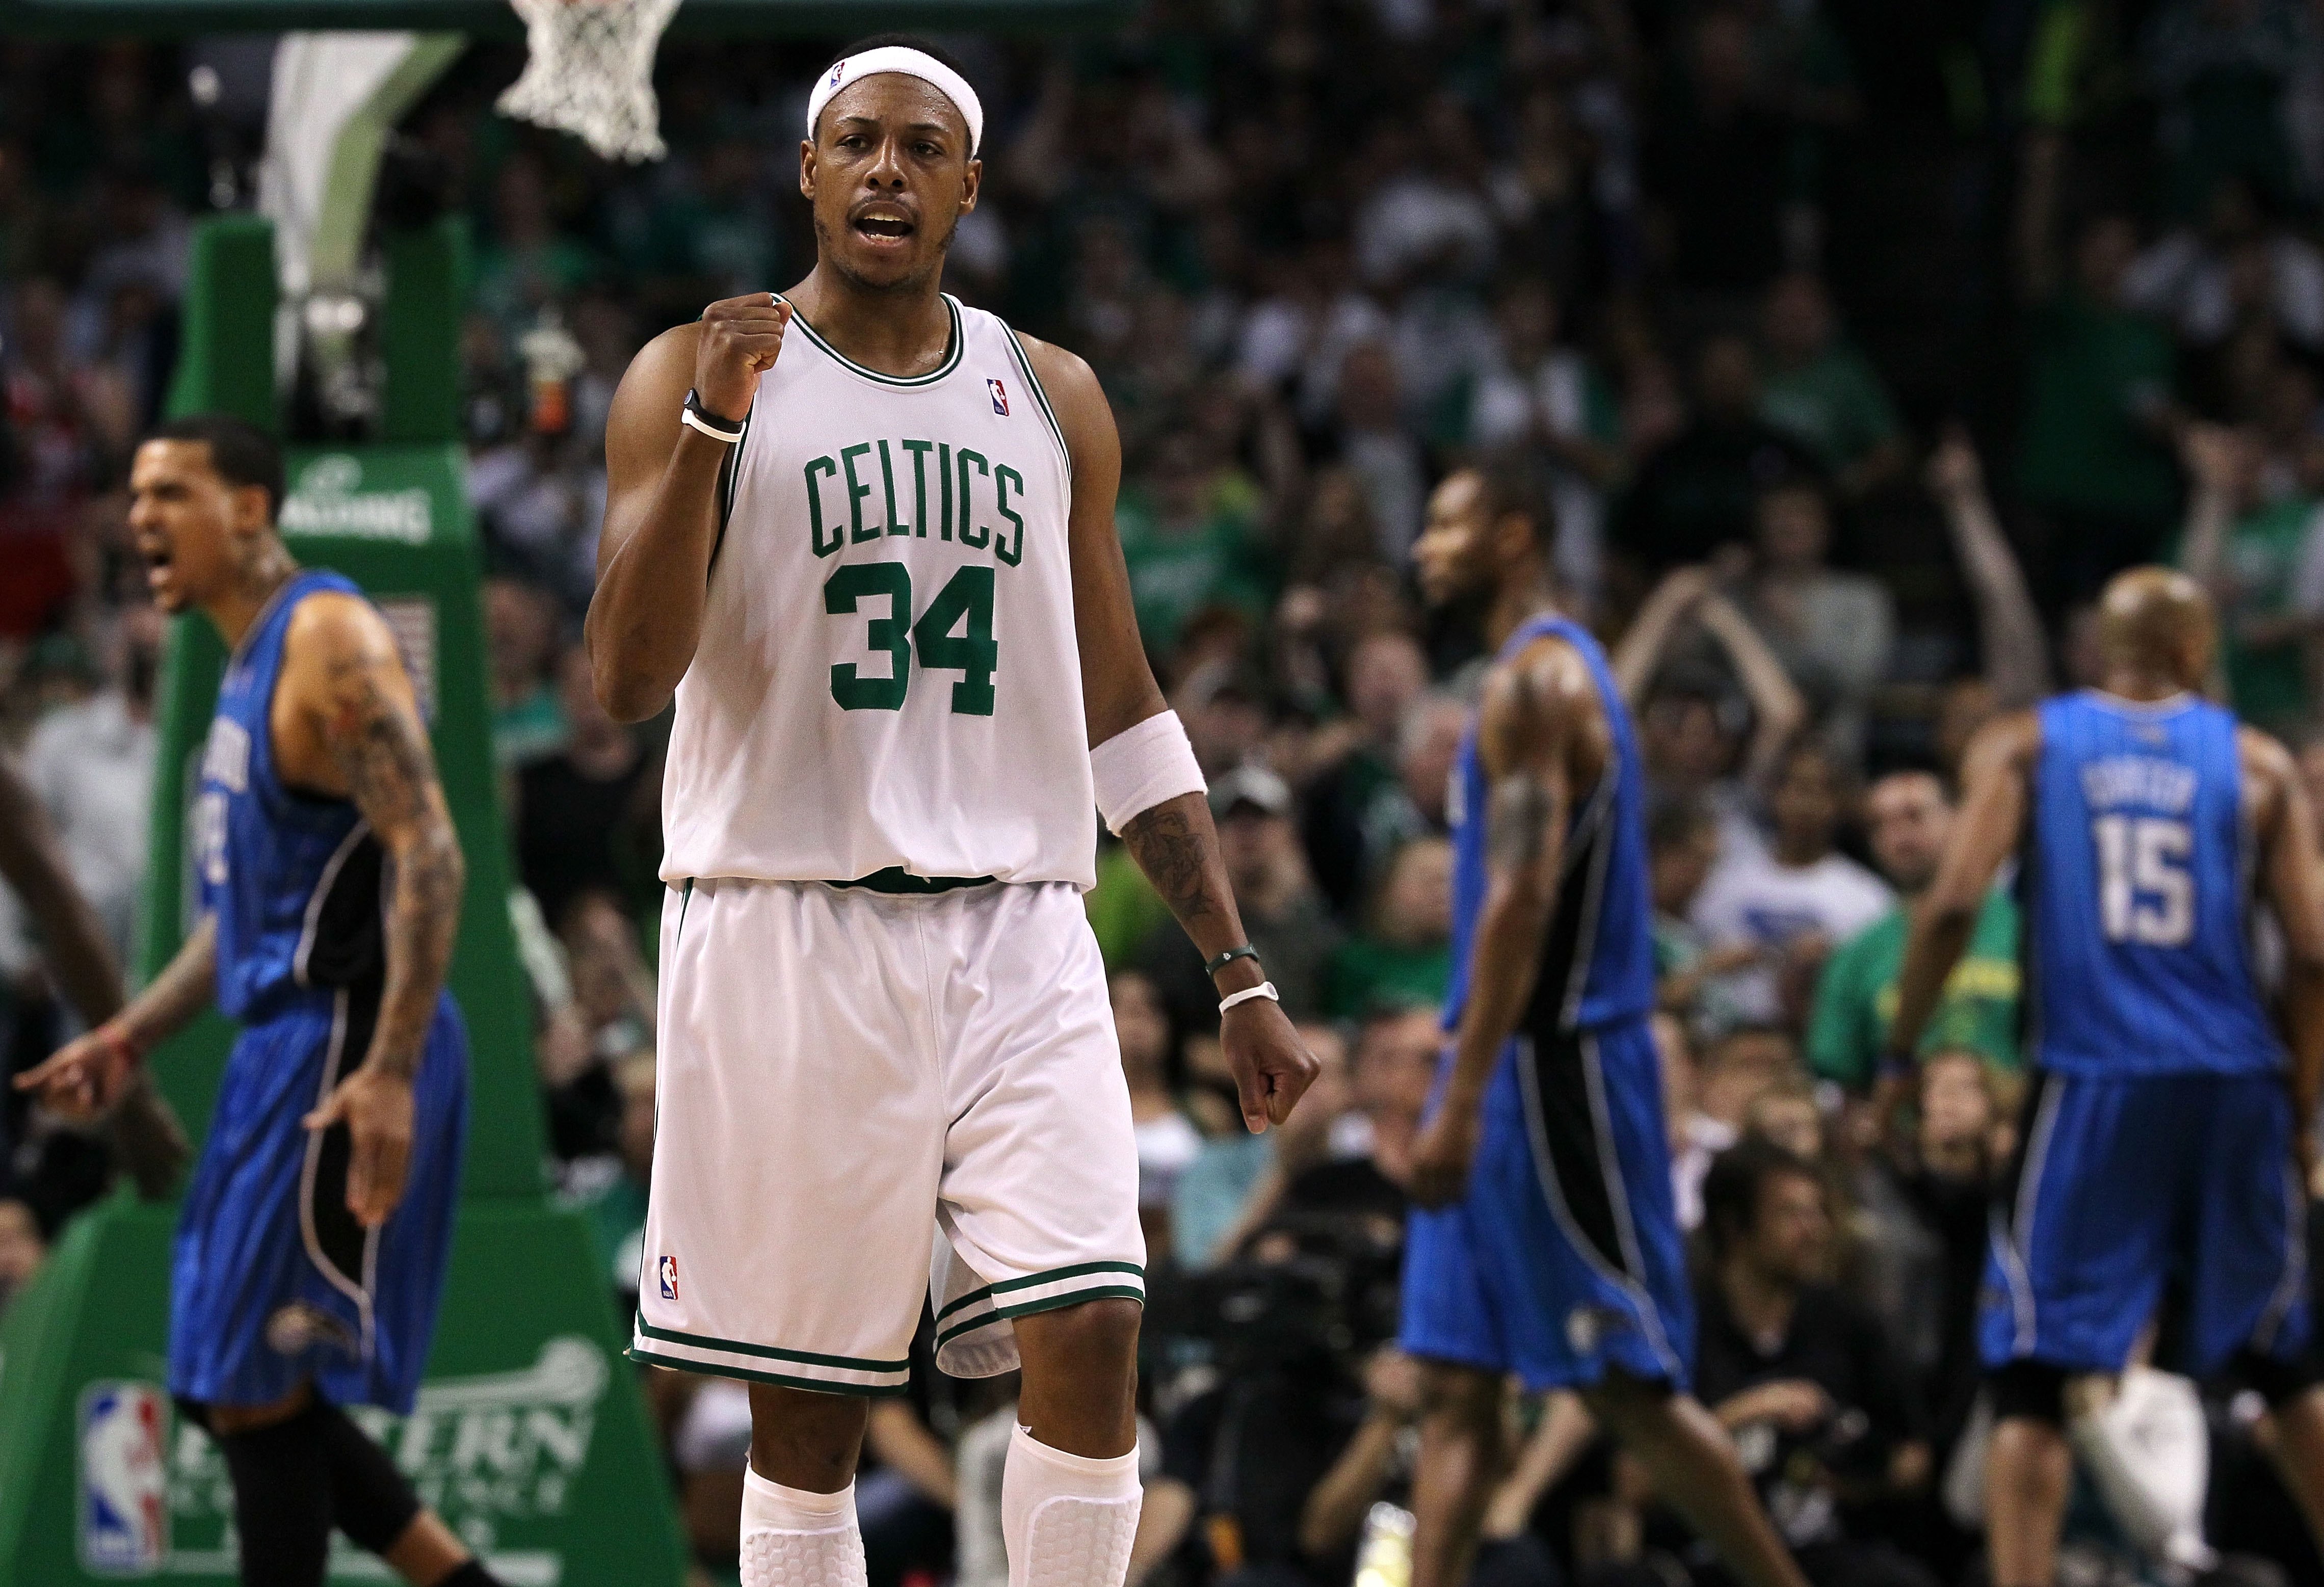 BOSTON - MAY 28:  Paul Pierce #34 of the Boston Celtics reacts against the Orlando Magic in Game Six of the Eastern Conference Finals during the 2010 NBA Playoffs at TD Garden on May 28, 2010 in Boston, Massachusetts.  NOTE TO USER: User expressly acknowl